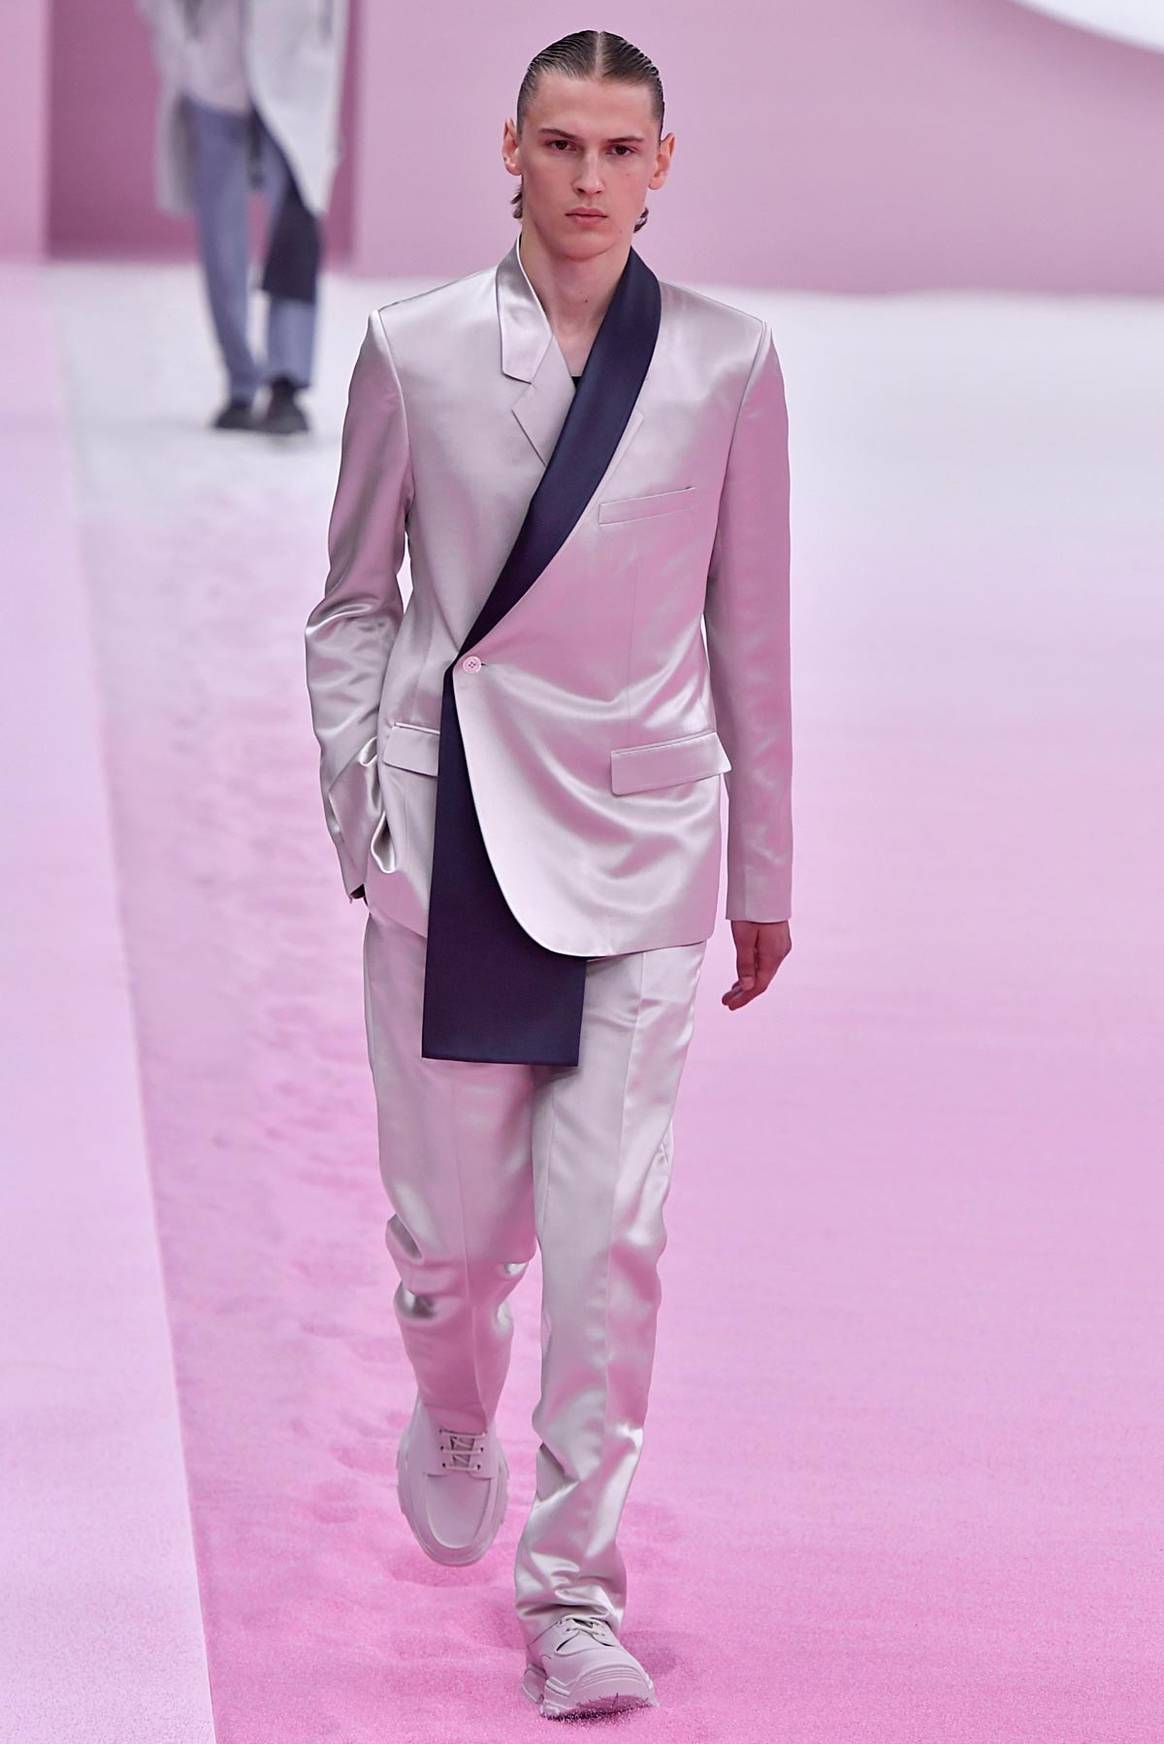 Menswear SS20 tailoring trends